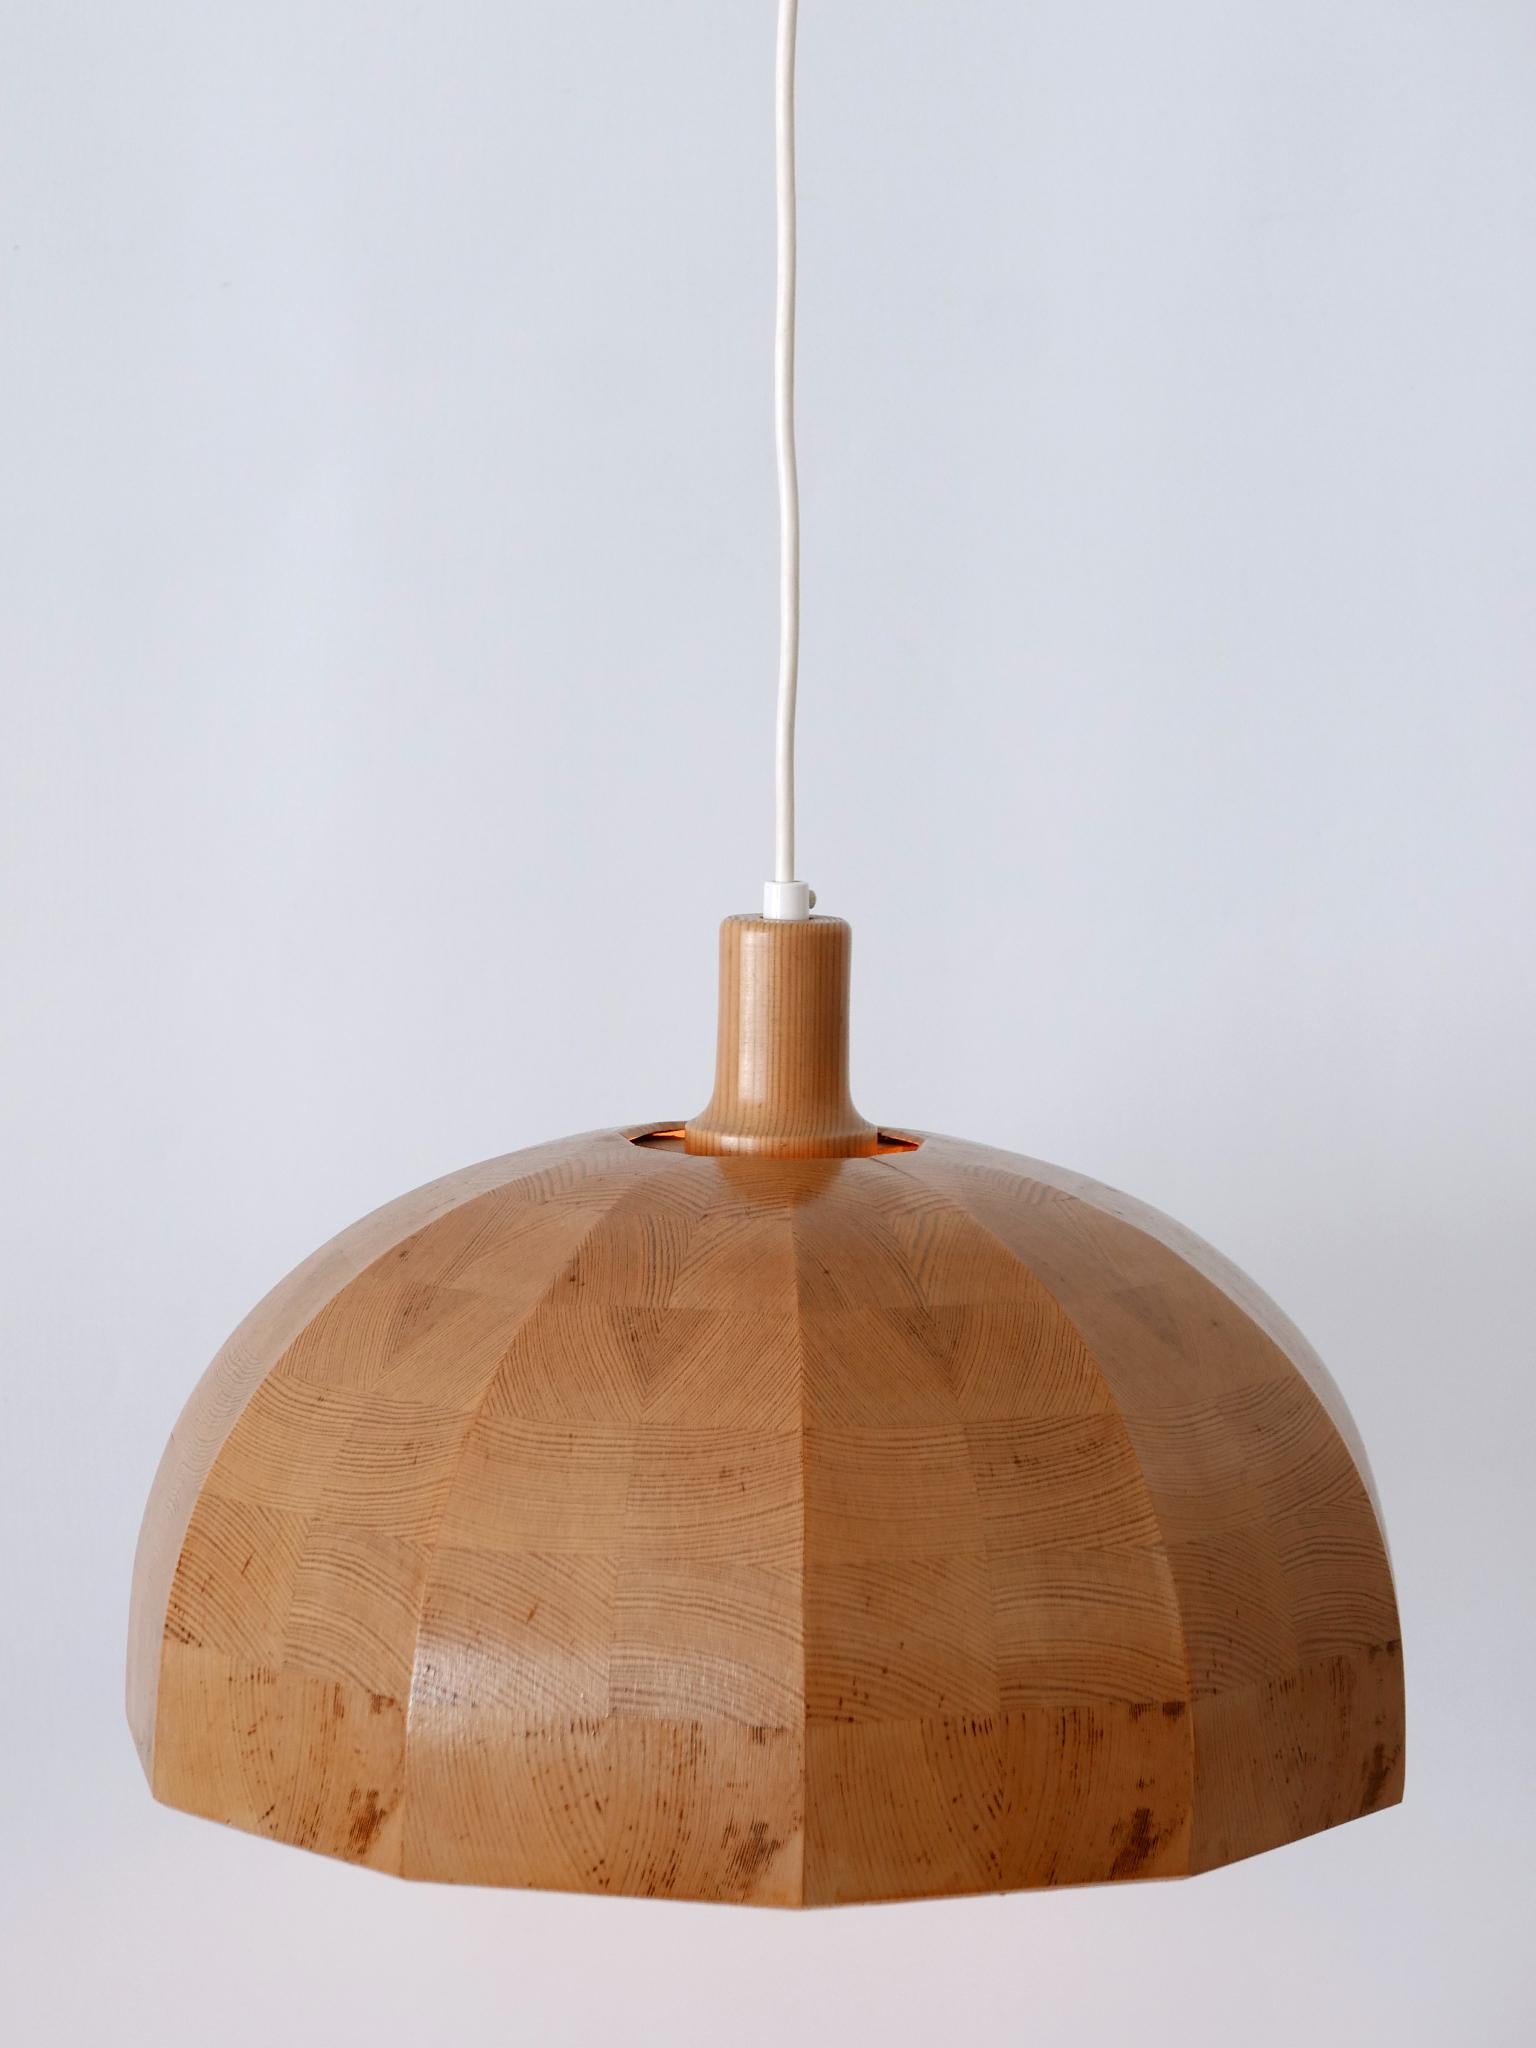 Extremely rare, elegant highly decorative Mid-Century Modern pendant lamp or hanging light. Designed & manufactured in Sweden, 1960s.

Executed in pine wood, the lamp needs 1 x E27 / E26 Edison screw fit bulb, is rewired, in working condition and